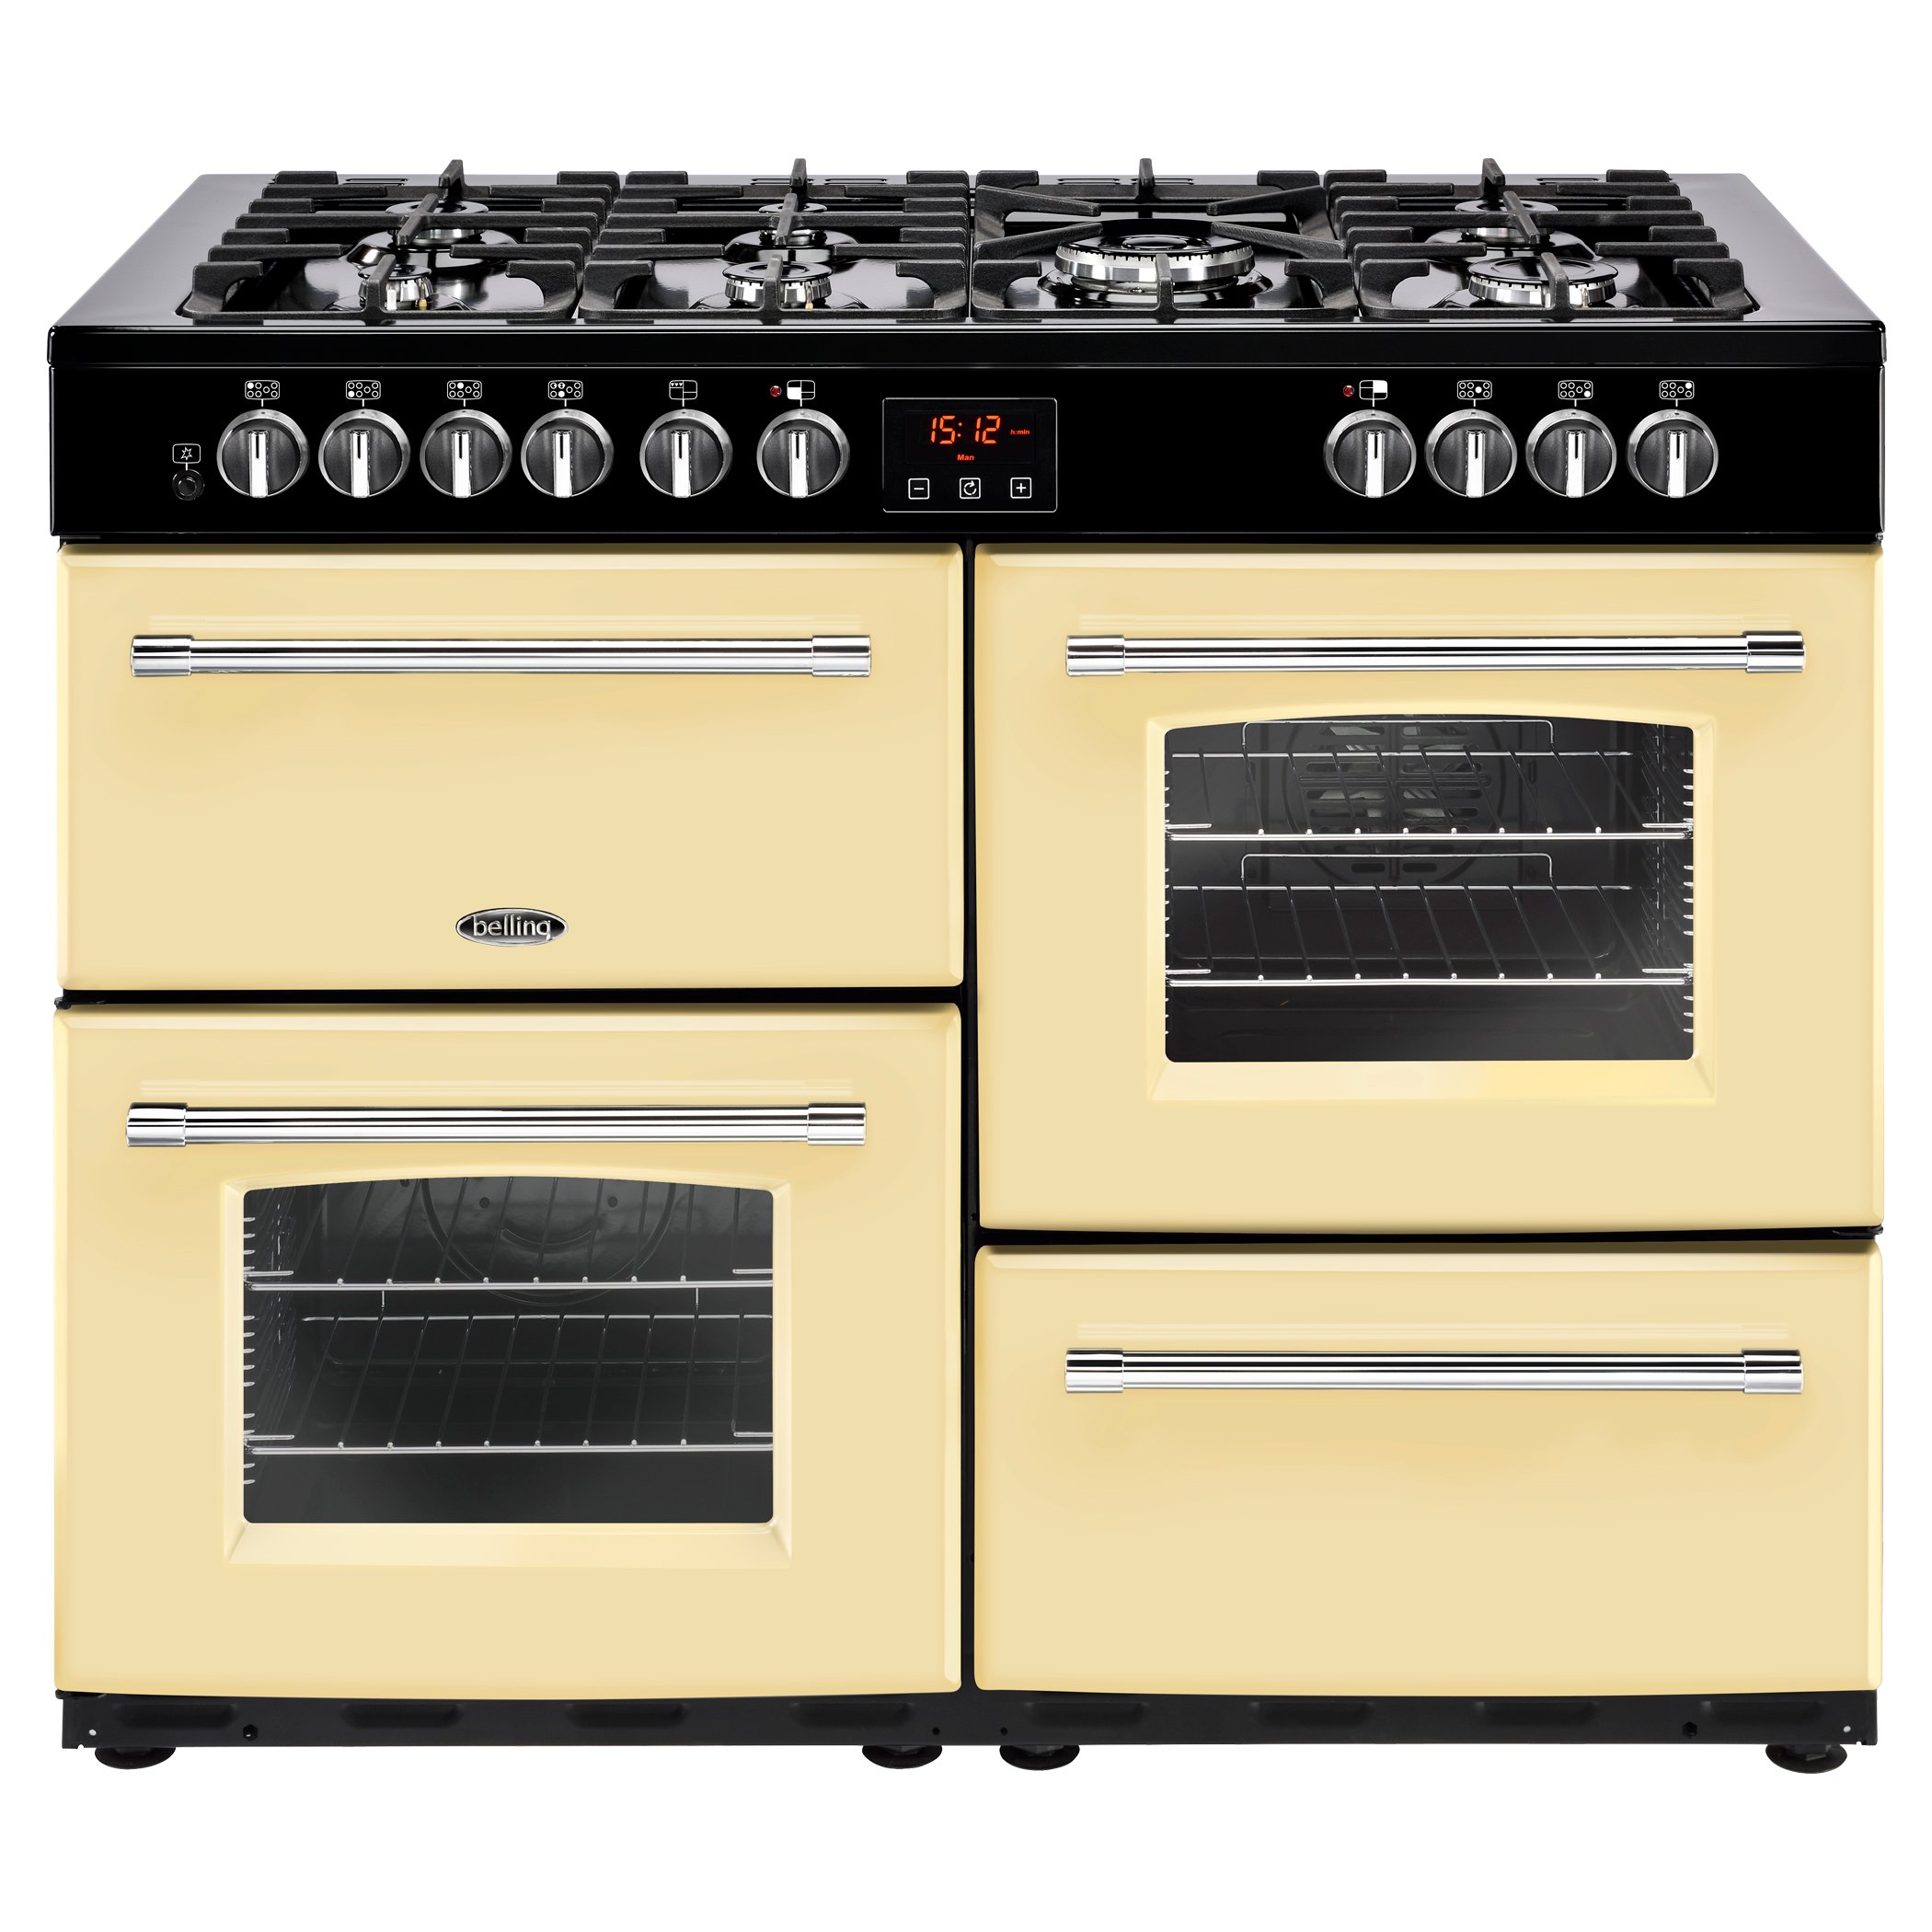 110cm dual fuel range cooker with 7 burner gas hob, 4kW PowerWok, Maxi-Clock and easy clean enamel.